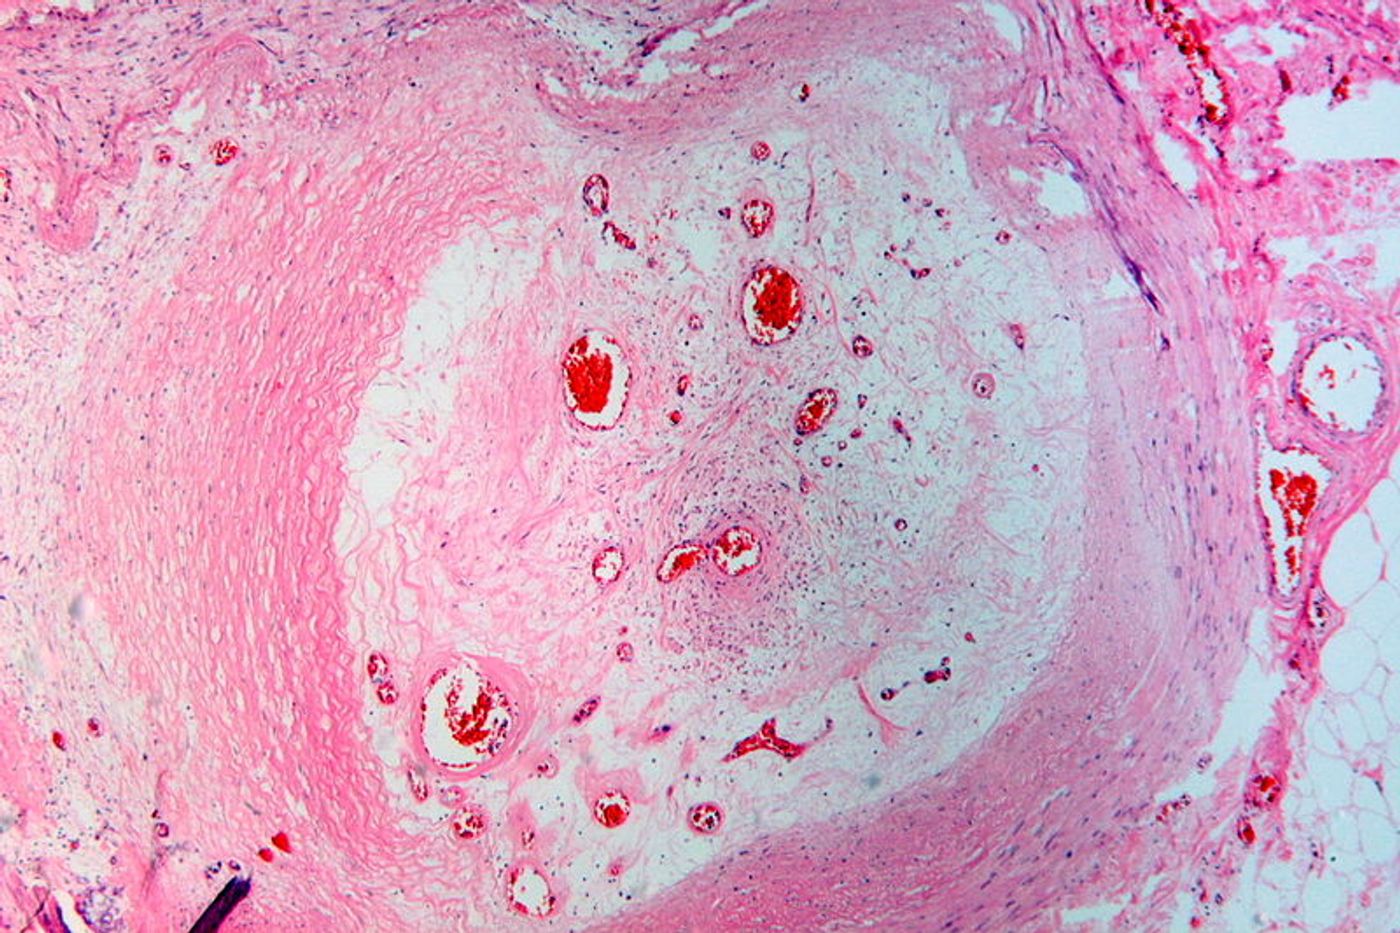 An occluded artery of the lower leg by an old organized thrombus in peripheral vascular disease. Credit: Wikimedia user Pathos